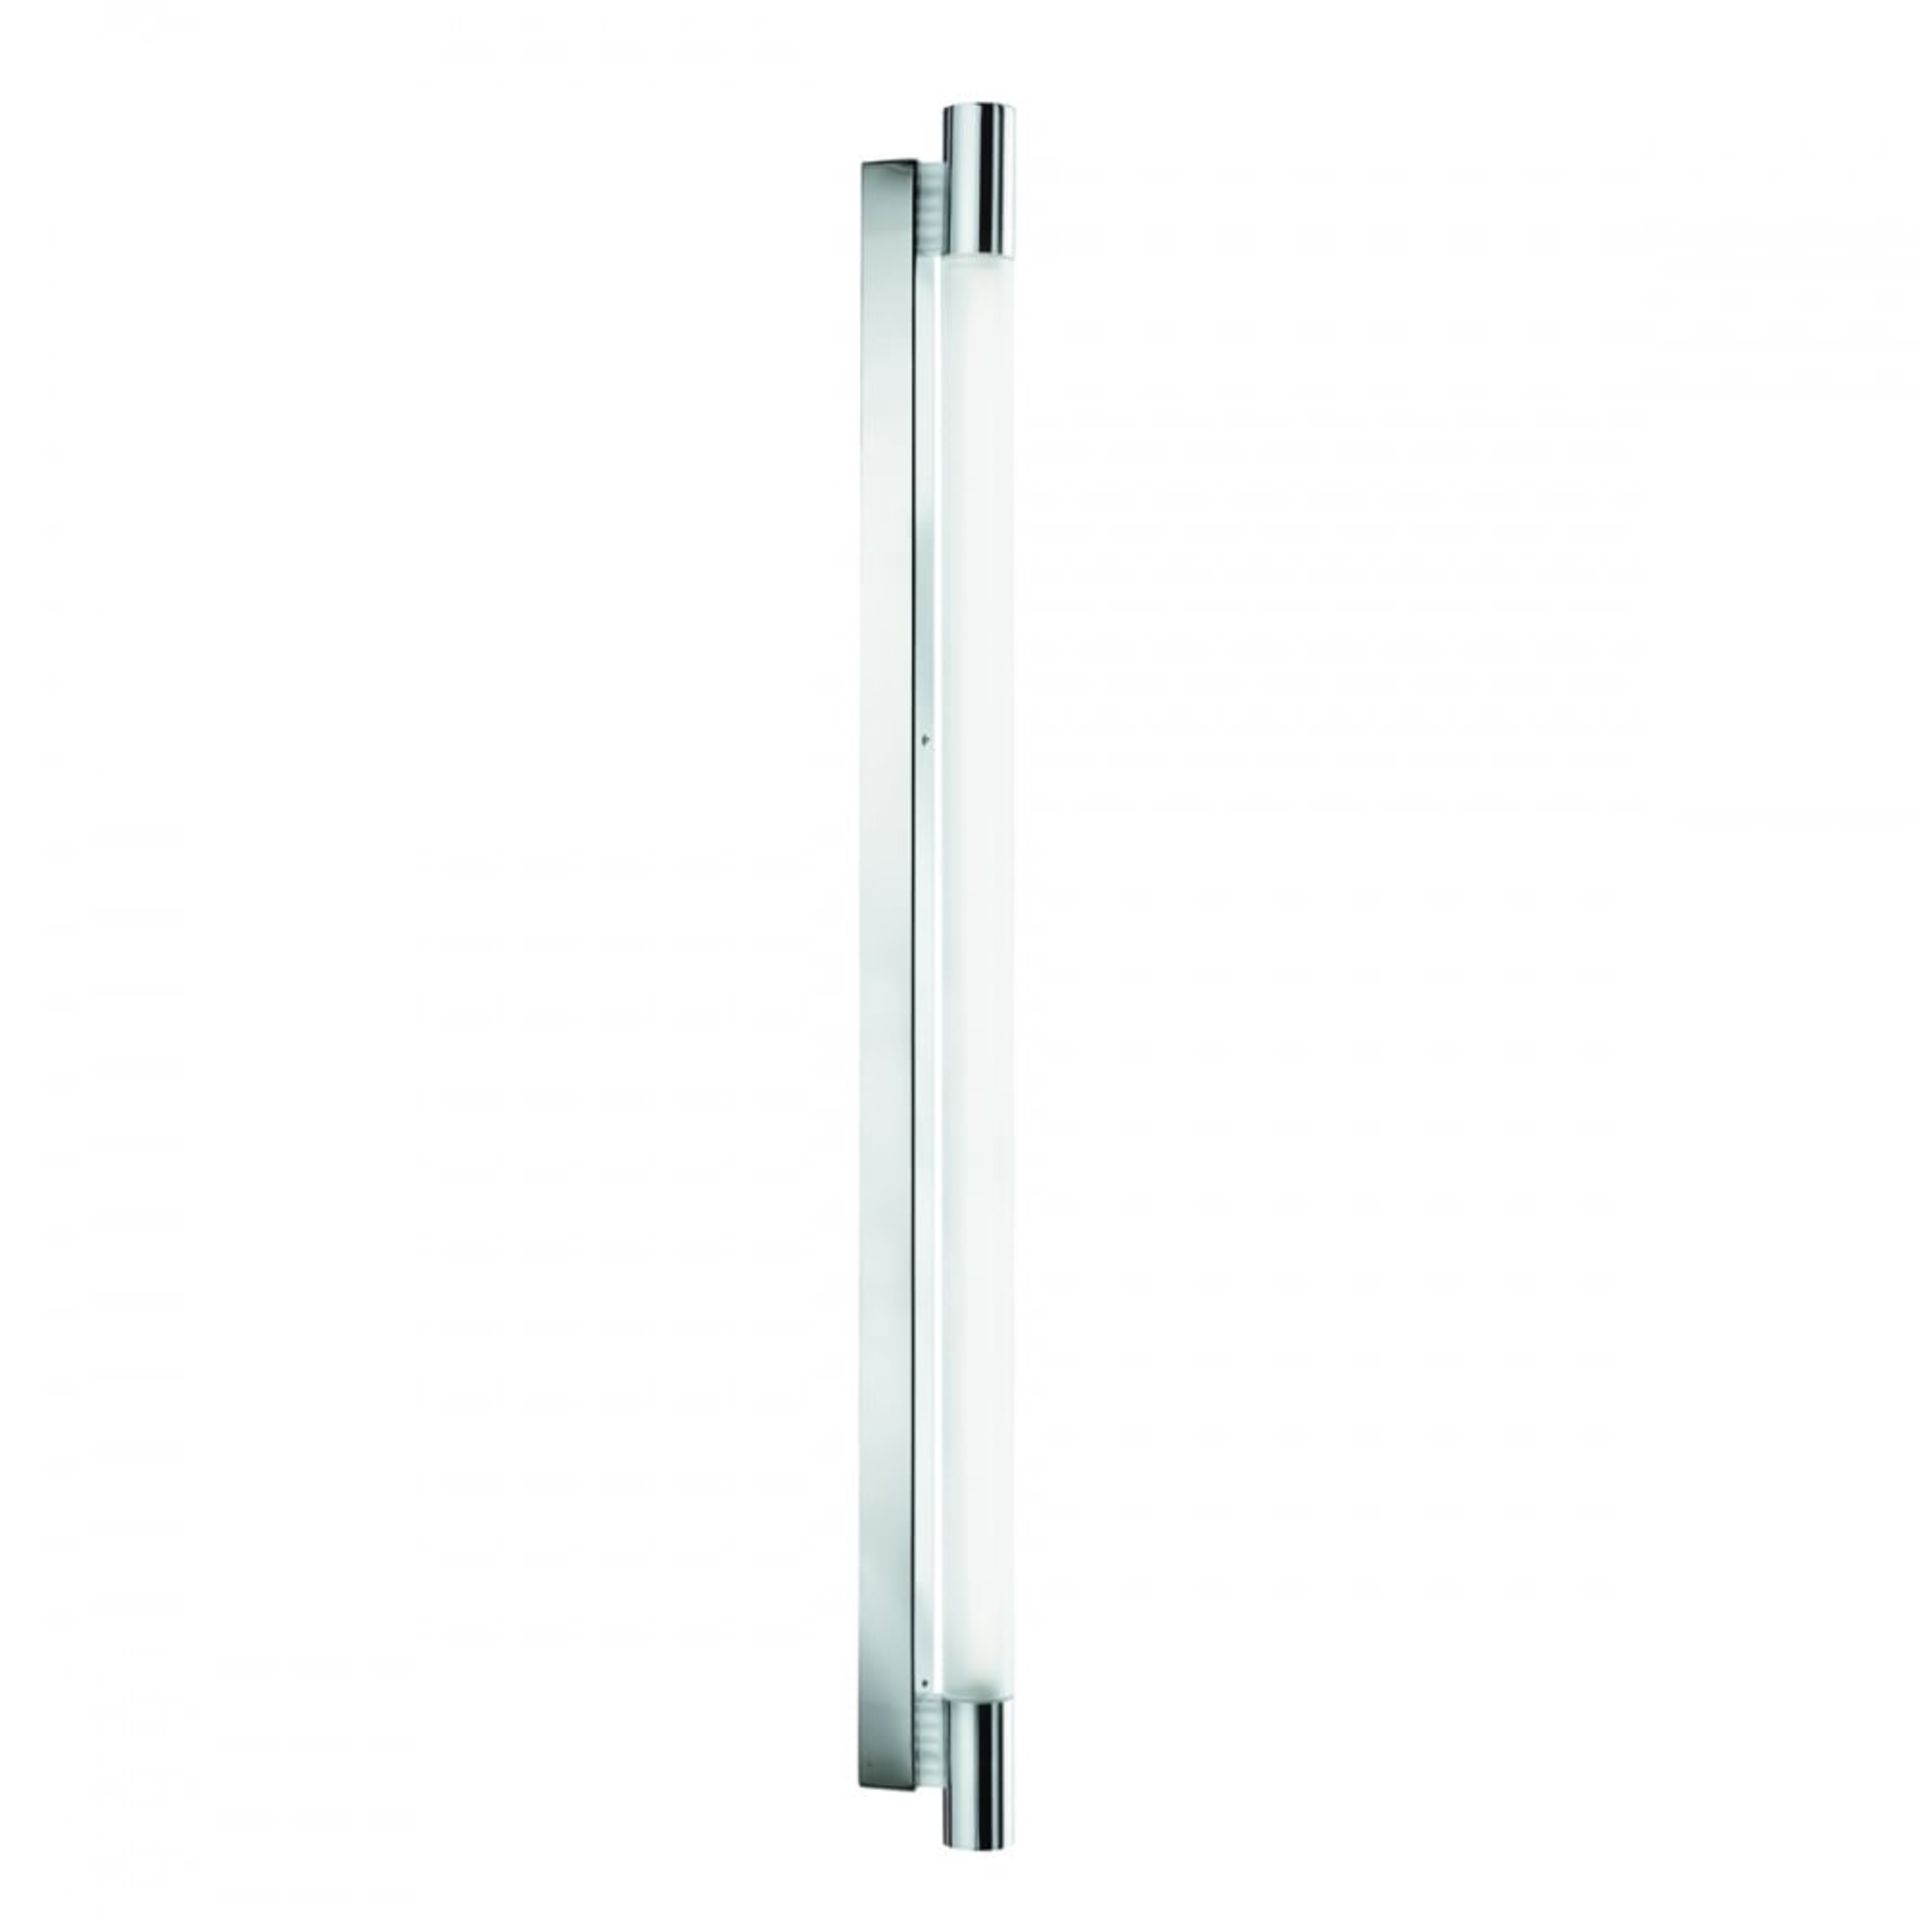 1 x Searchlight Bathroom Light Fitting - Poplar 100cm Wall Light With T5Tube, Frosted Glass Shade, - Image 4 of 4